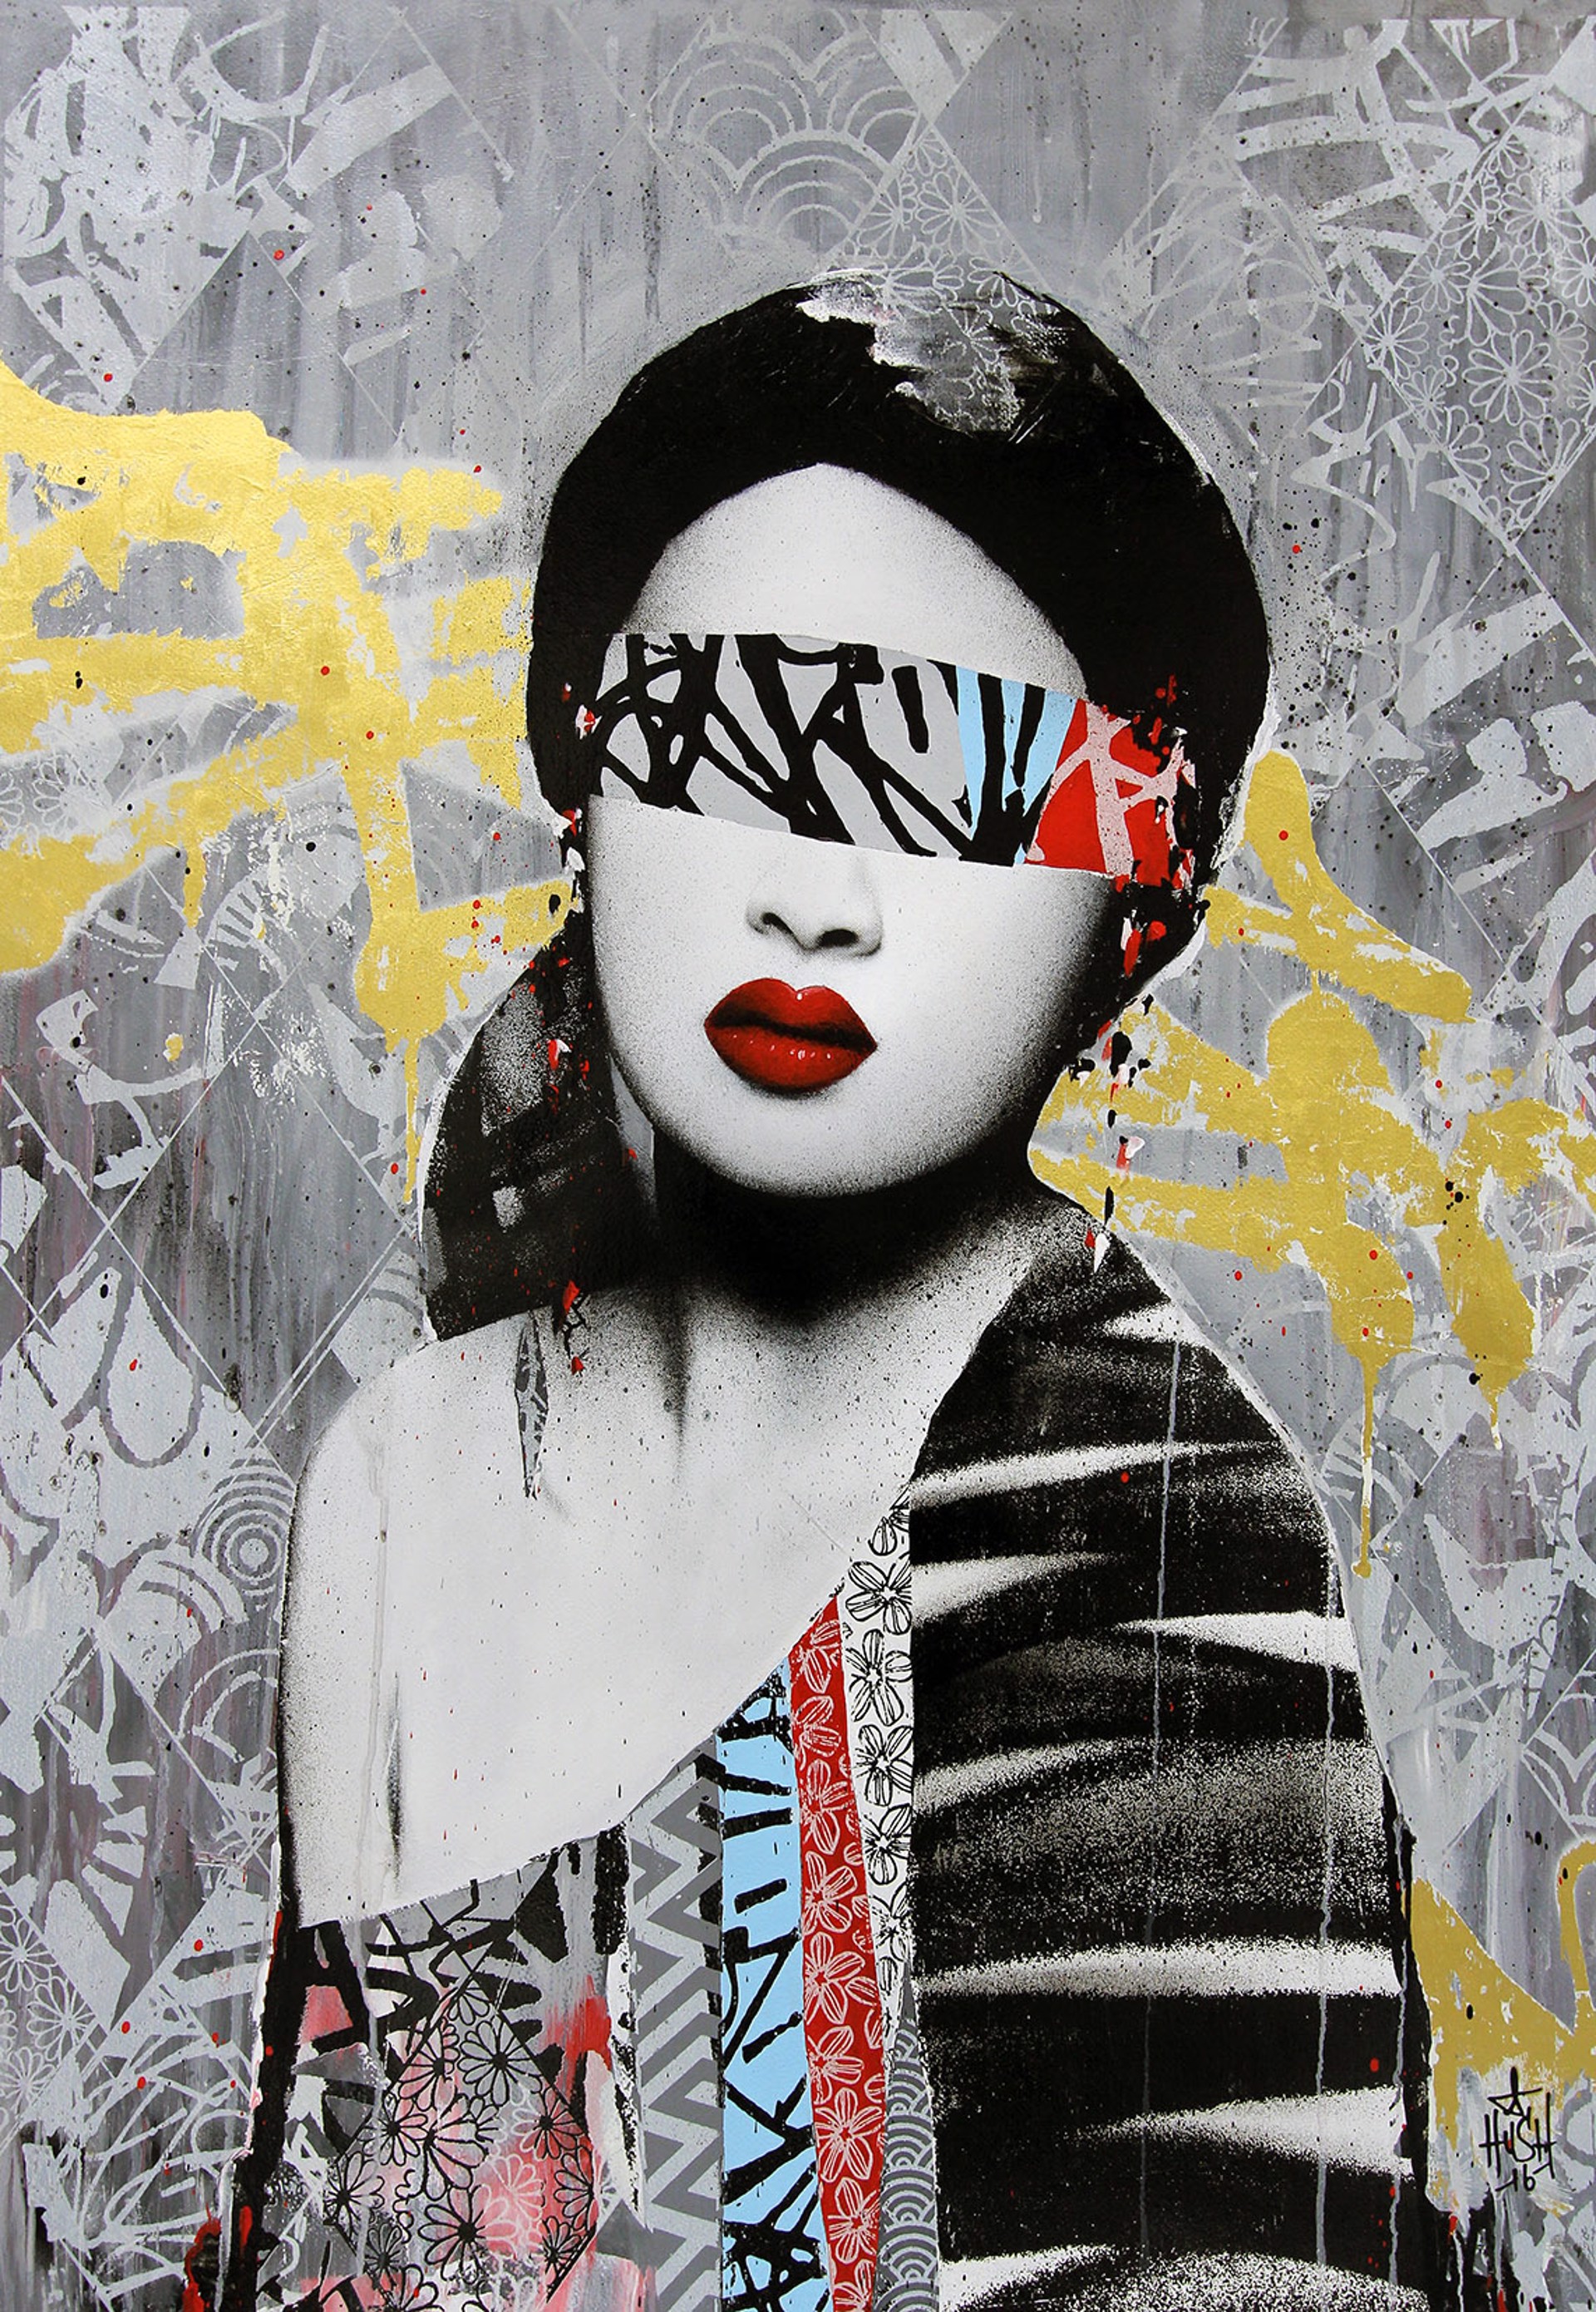 All Eyes On Me by Hush